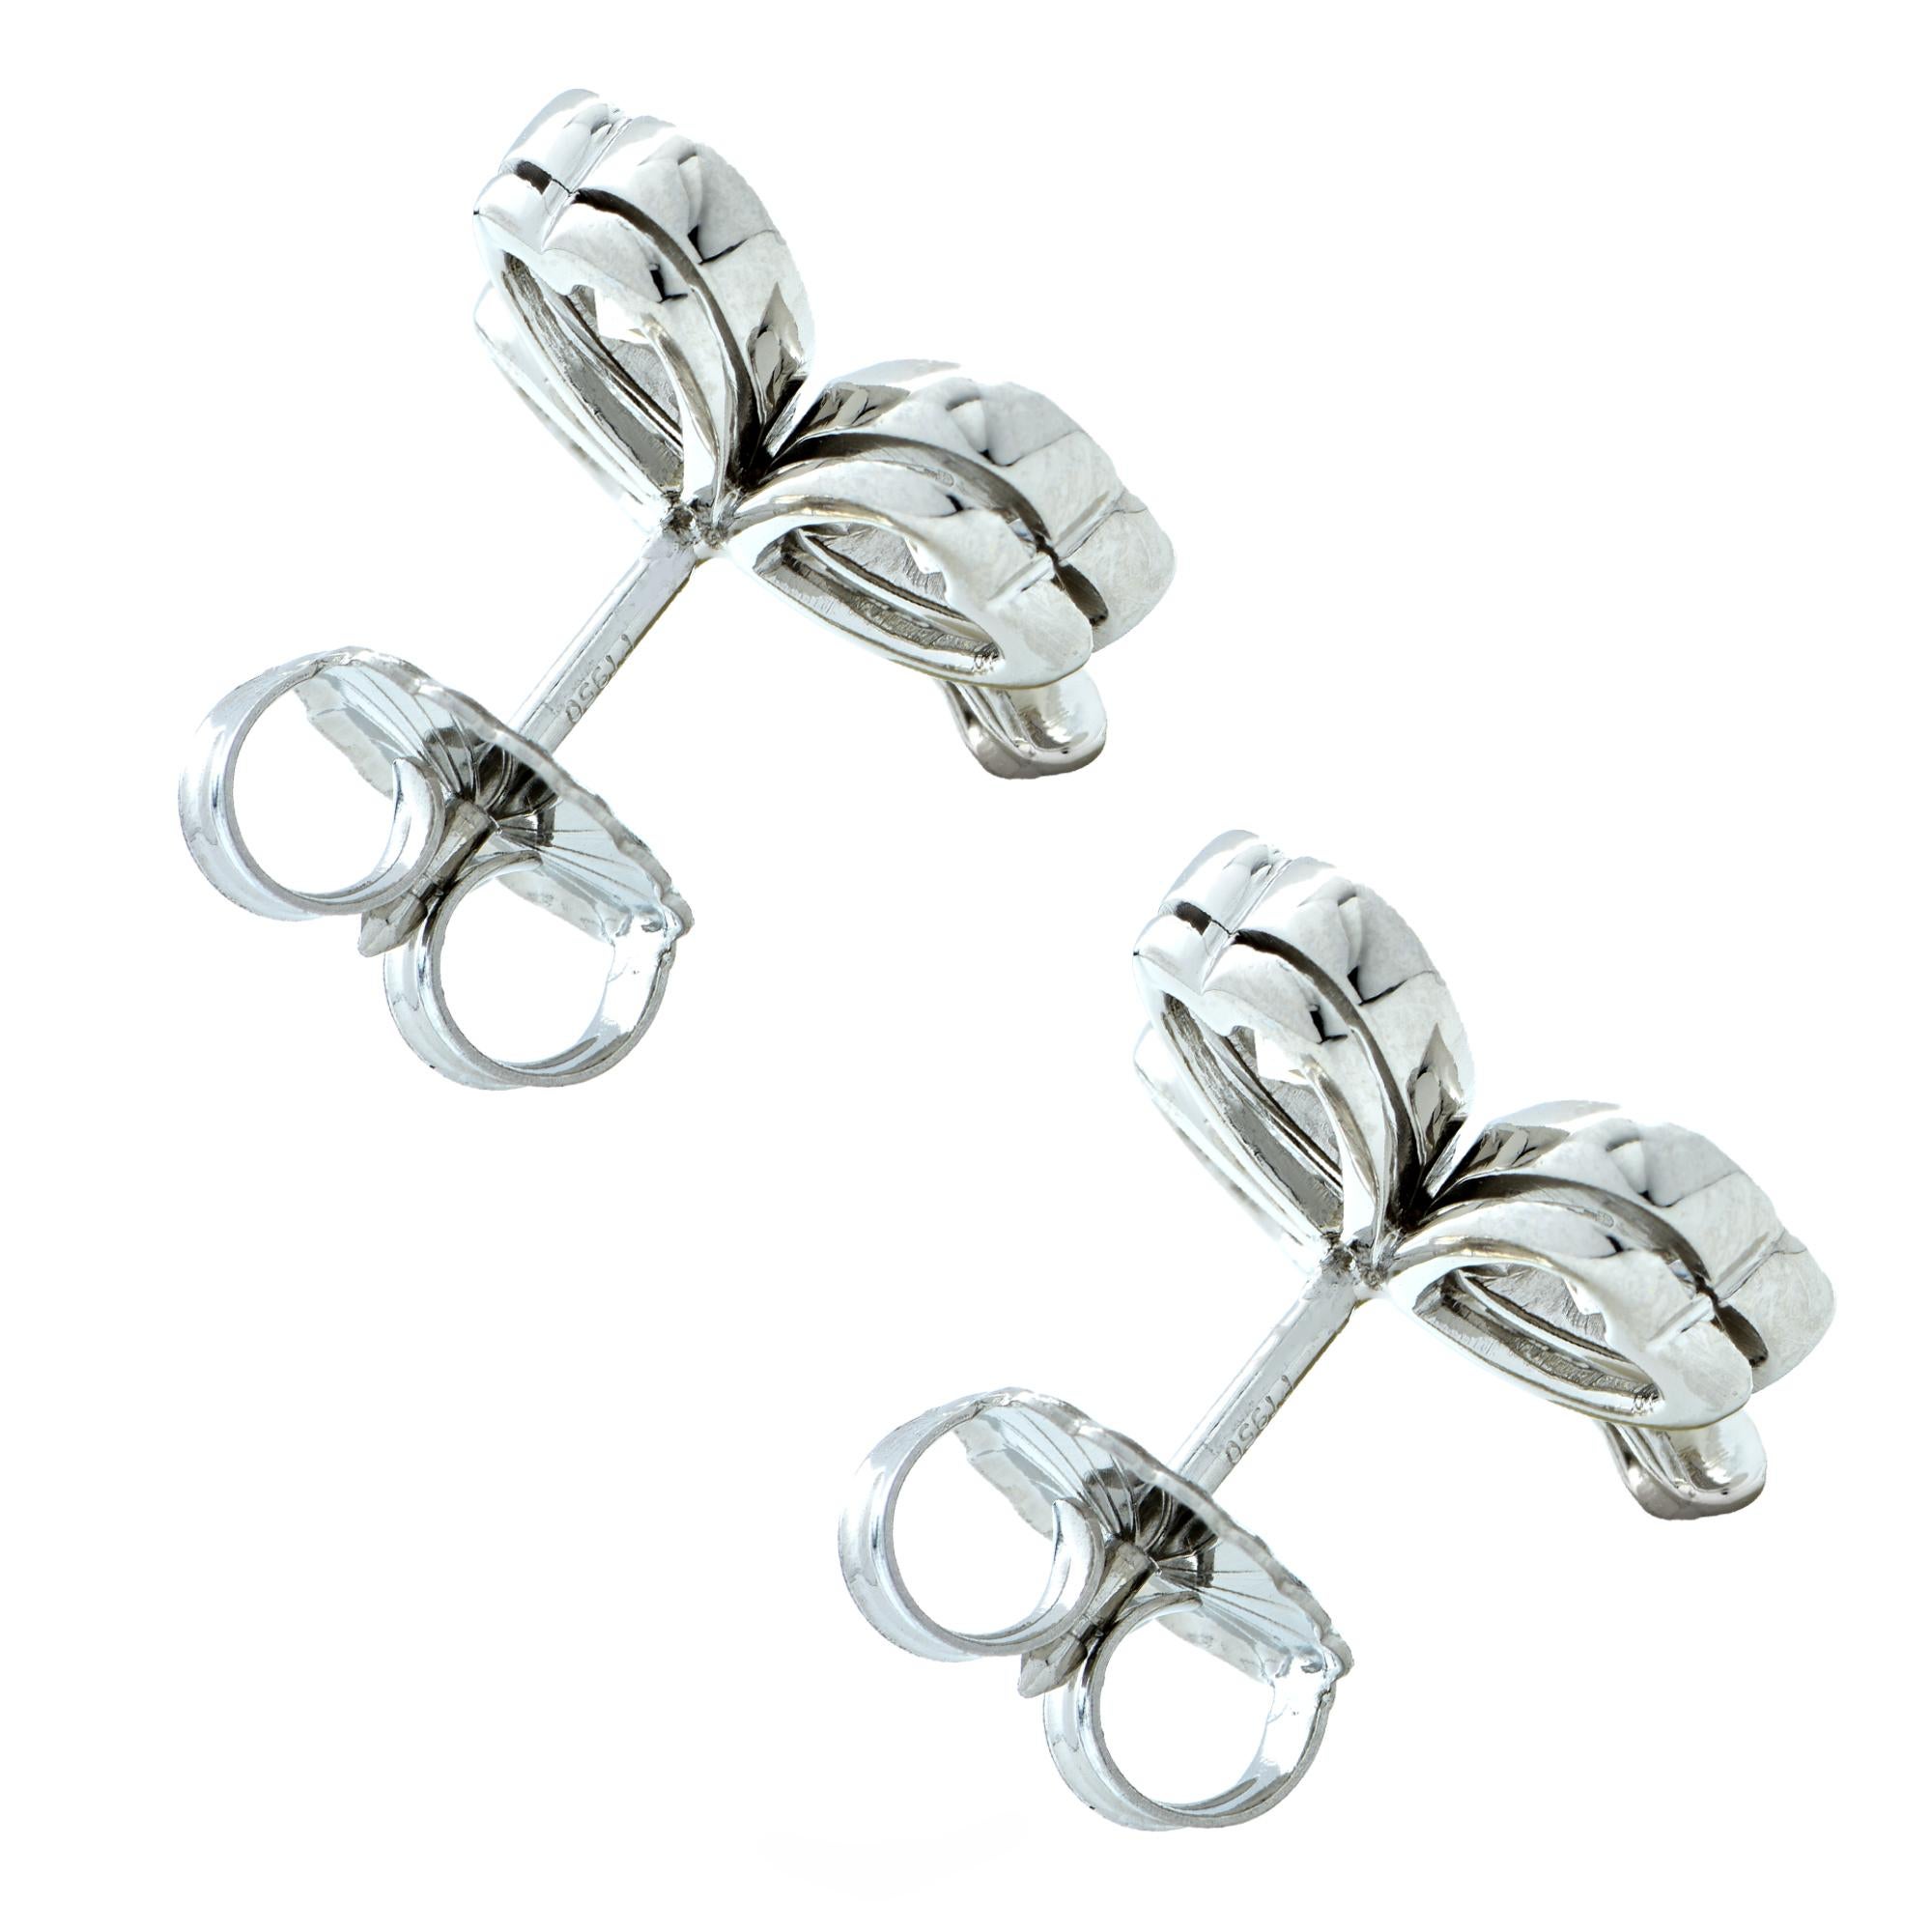 Delightful earrings crafted in platinum featuring 6 round brilliant cut diamonds weighing approximately 3 carats, F color VS clarity, and 10 round brilliant cut diamonds weighing approximately .50 carats F color VS clarity. These gorgeous bright